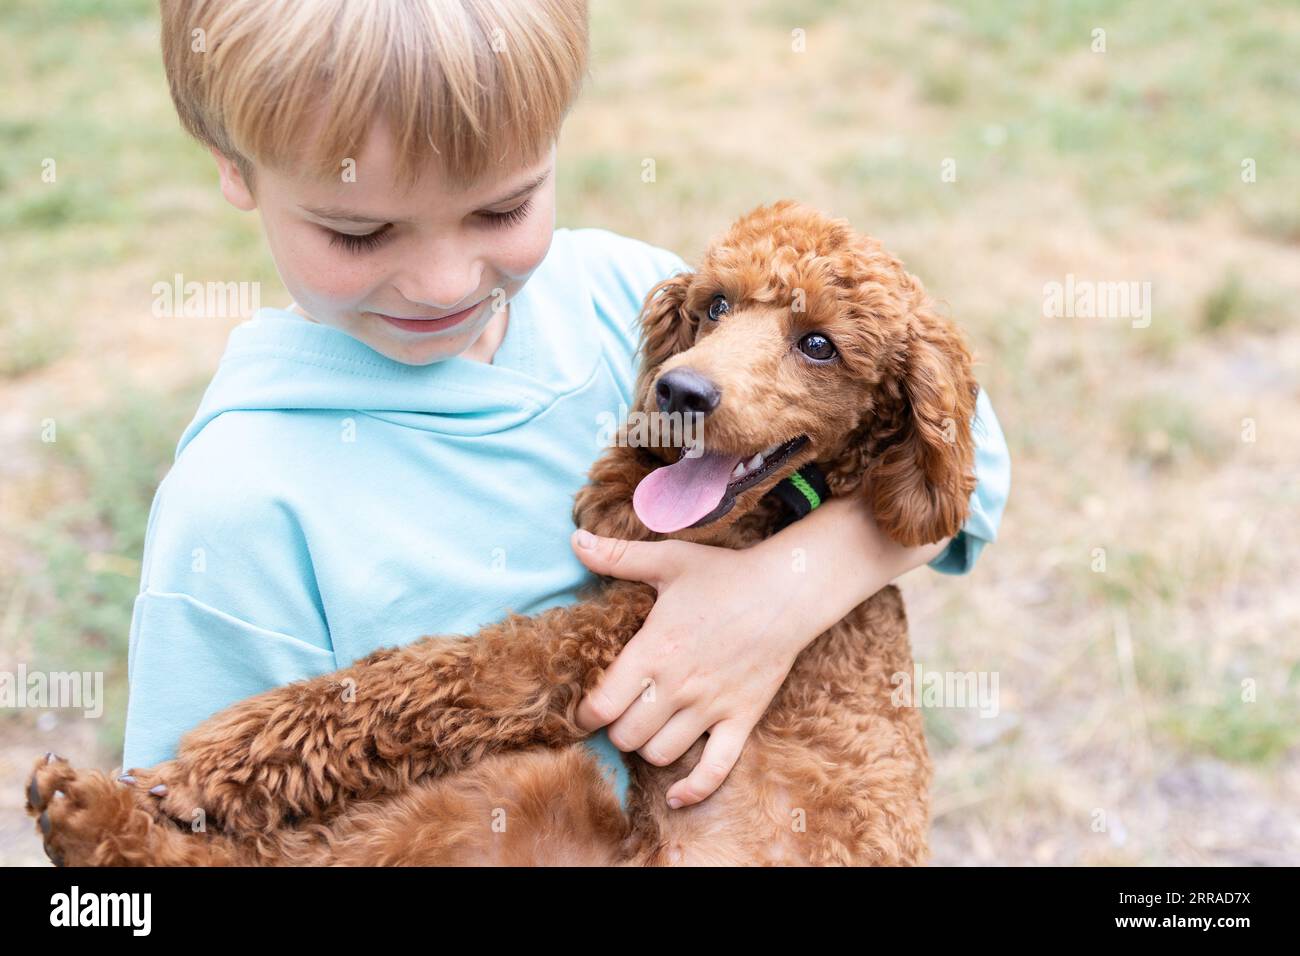 little boy is holding a brown poodle puppy in his arms. close-up of the face of a boy and a beloved pet. dog day. Happy childhood with a furry friend. Stock Photo